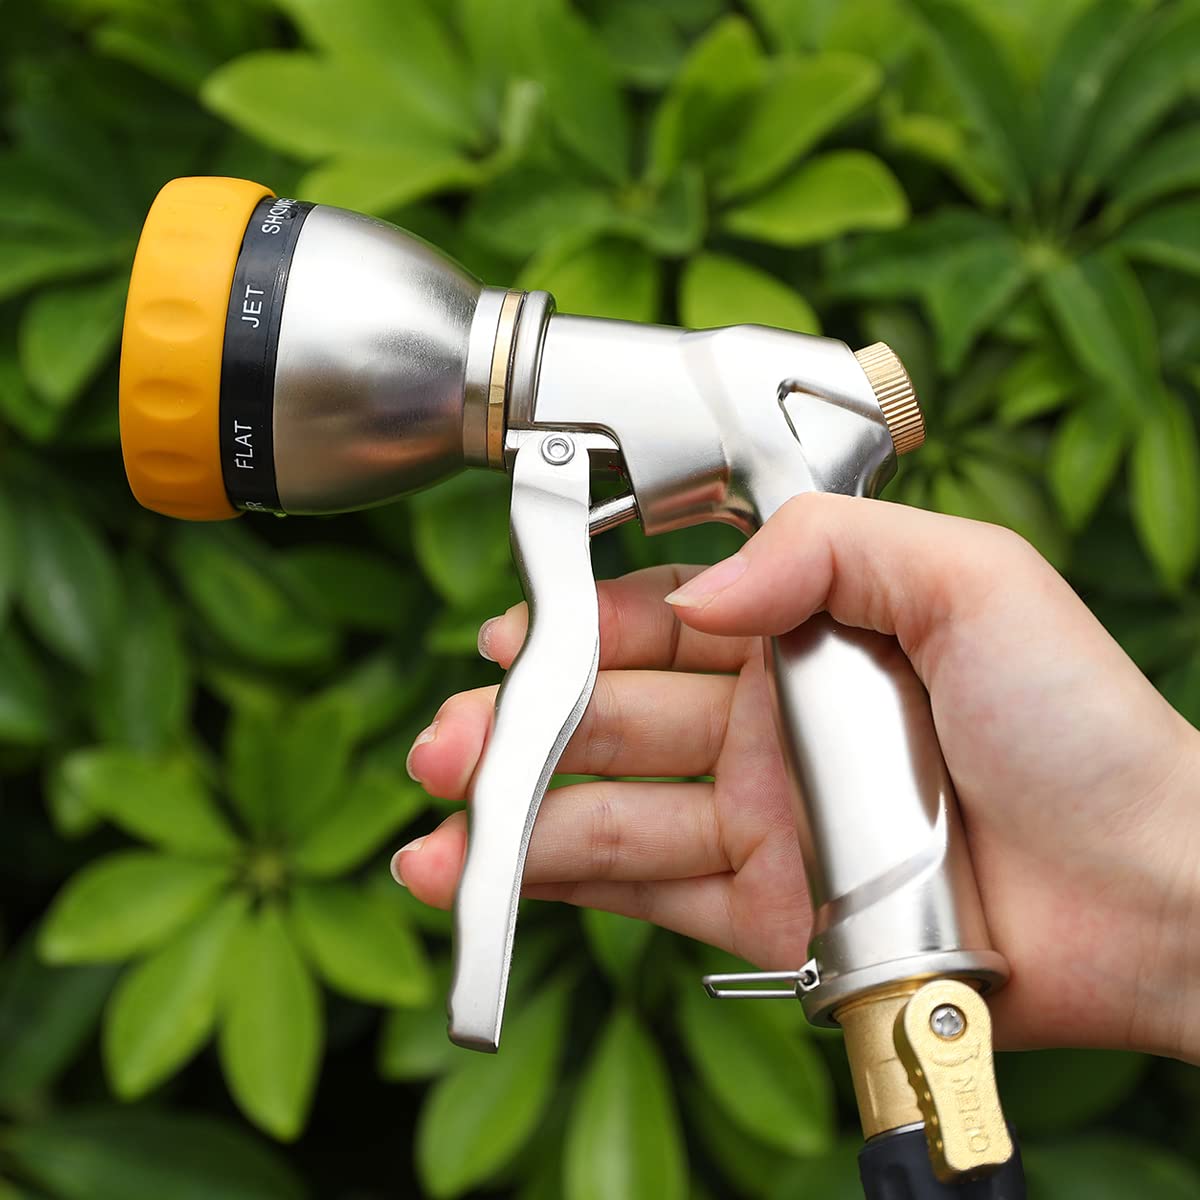 FANHAO Garden Hose Nozzle Sprayer, 100% Heavy Duty Metal Water Hose Sprayer with 7 Spray Patterns, High Pressure Spray Nozzle for Watering Plants & Lawns, Washing Cars & Pets